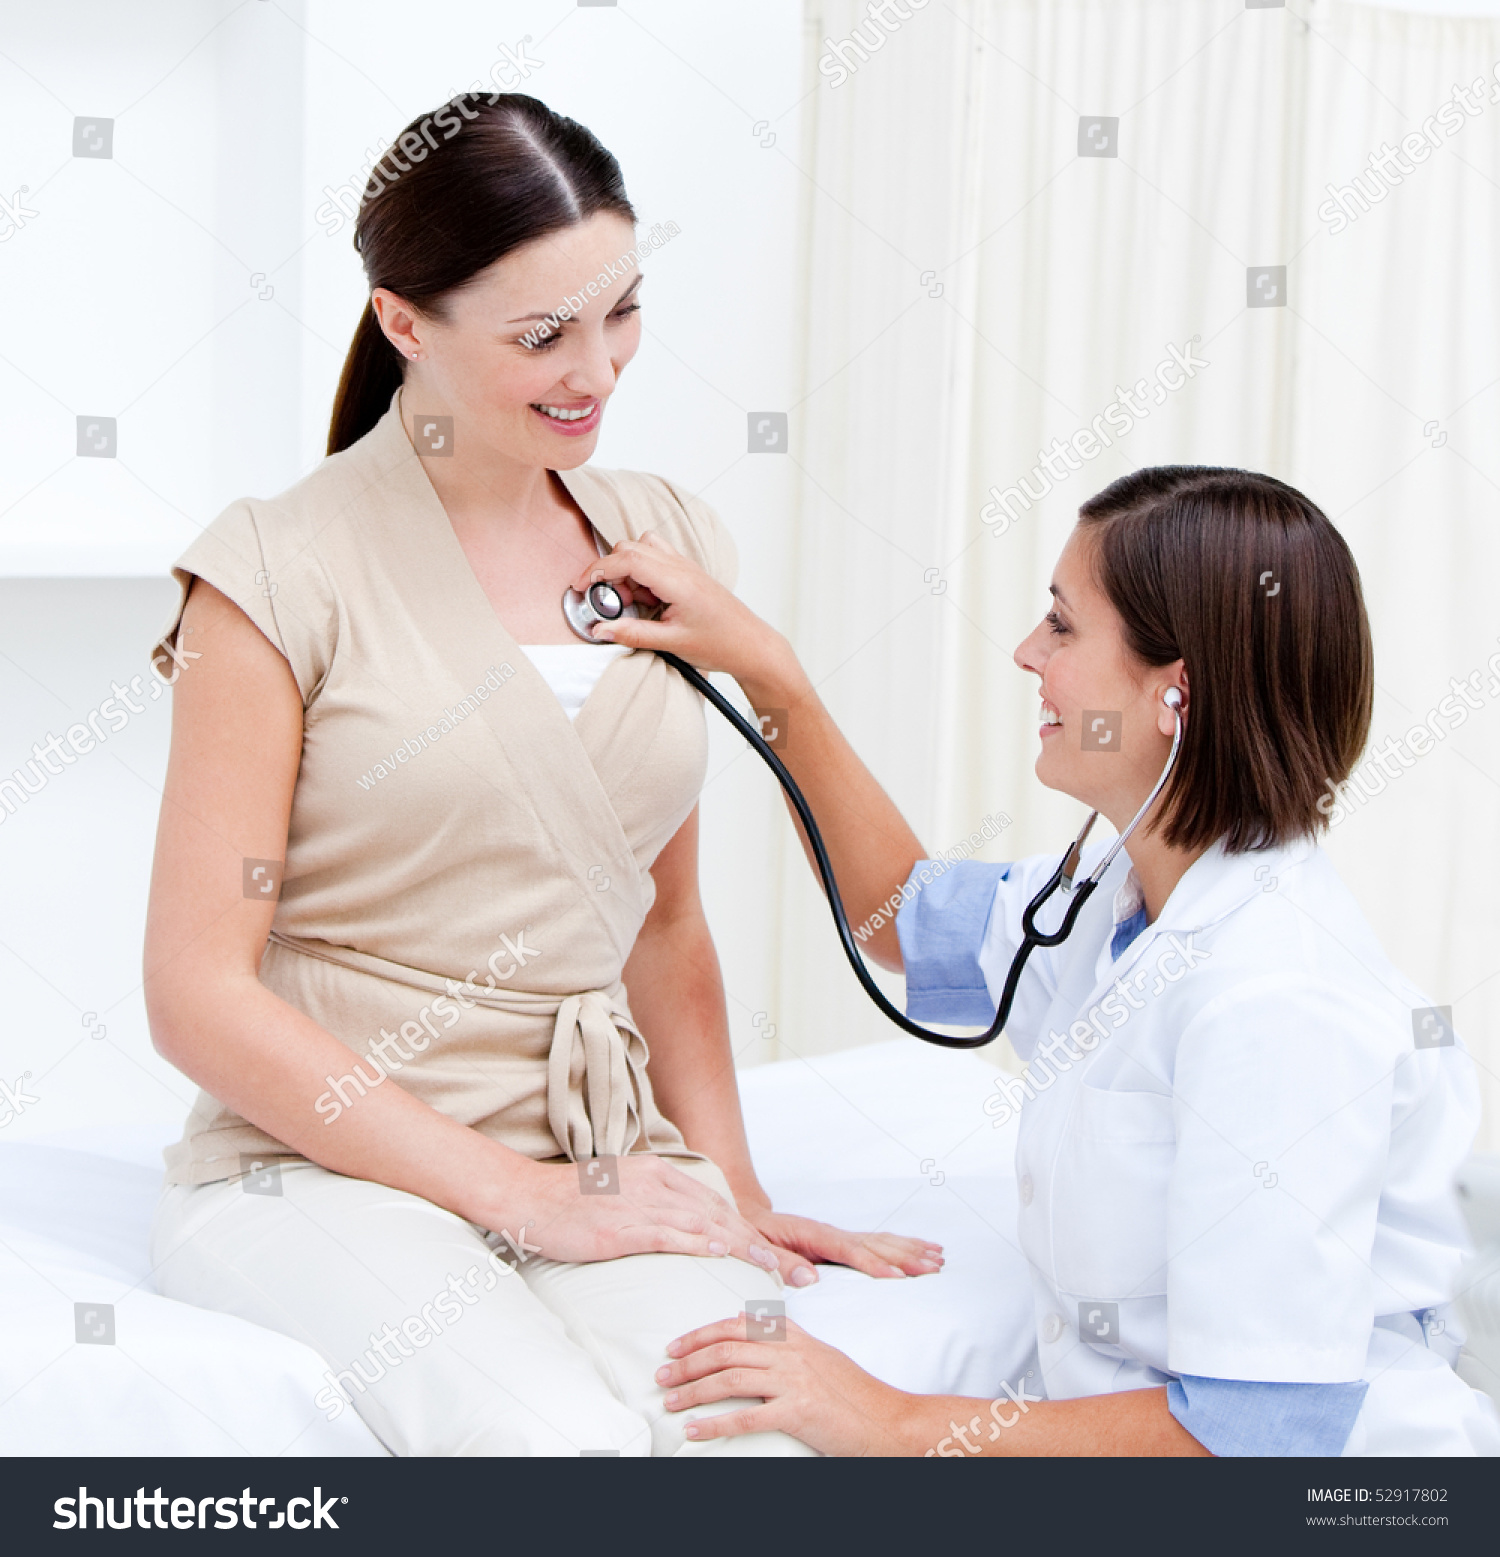 Female Doctor Examining Smiling Female Patient Stock Photo 52917802 - Shutterstock-5556